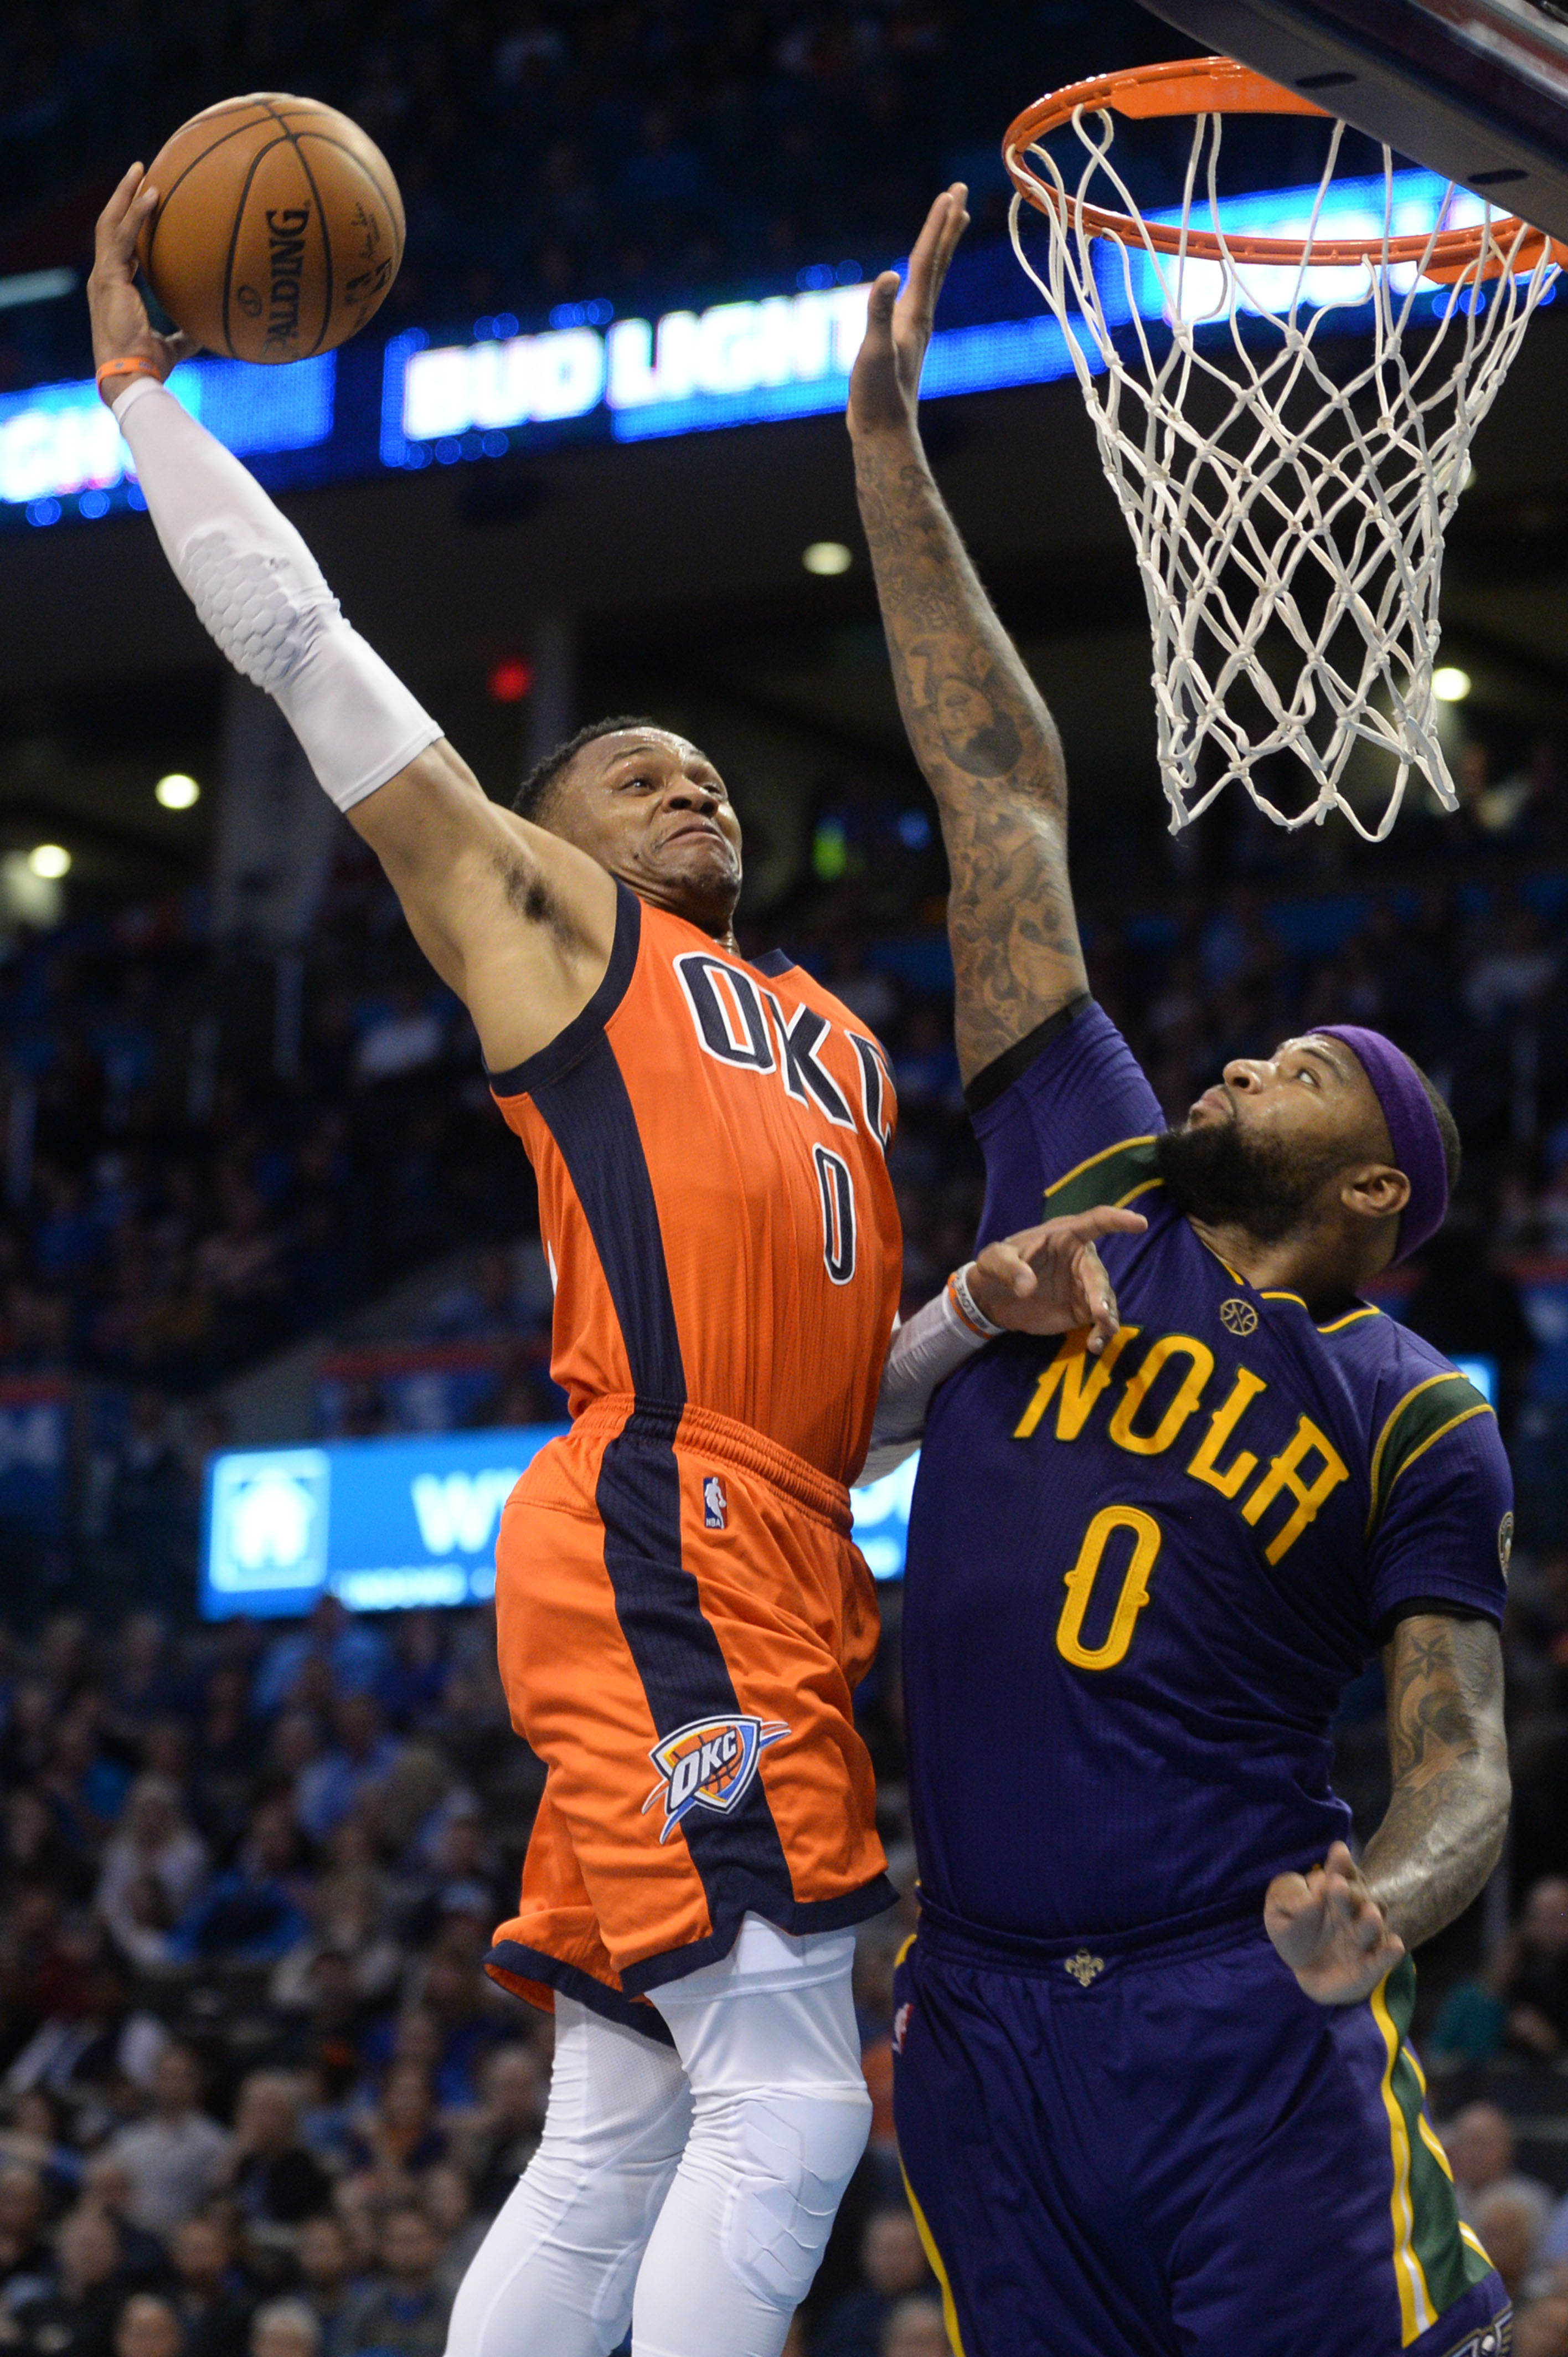 oklahoma city thunder defeat the new orleans pelicans